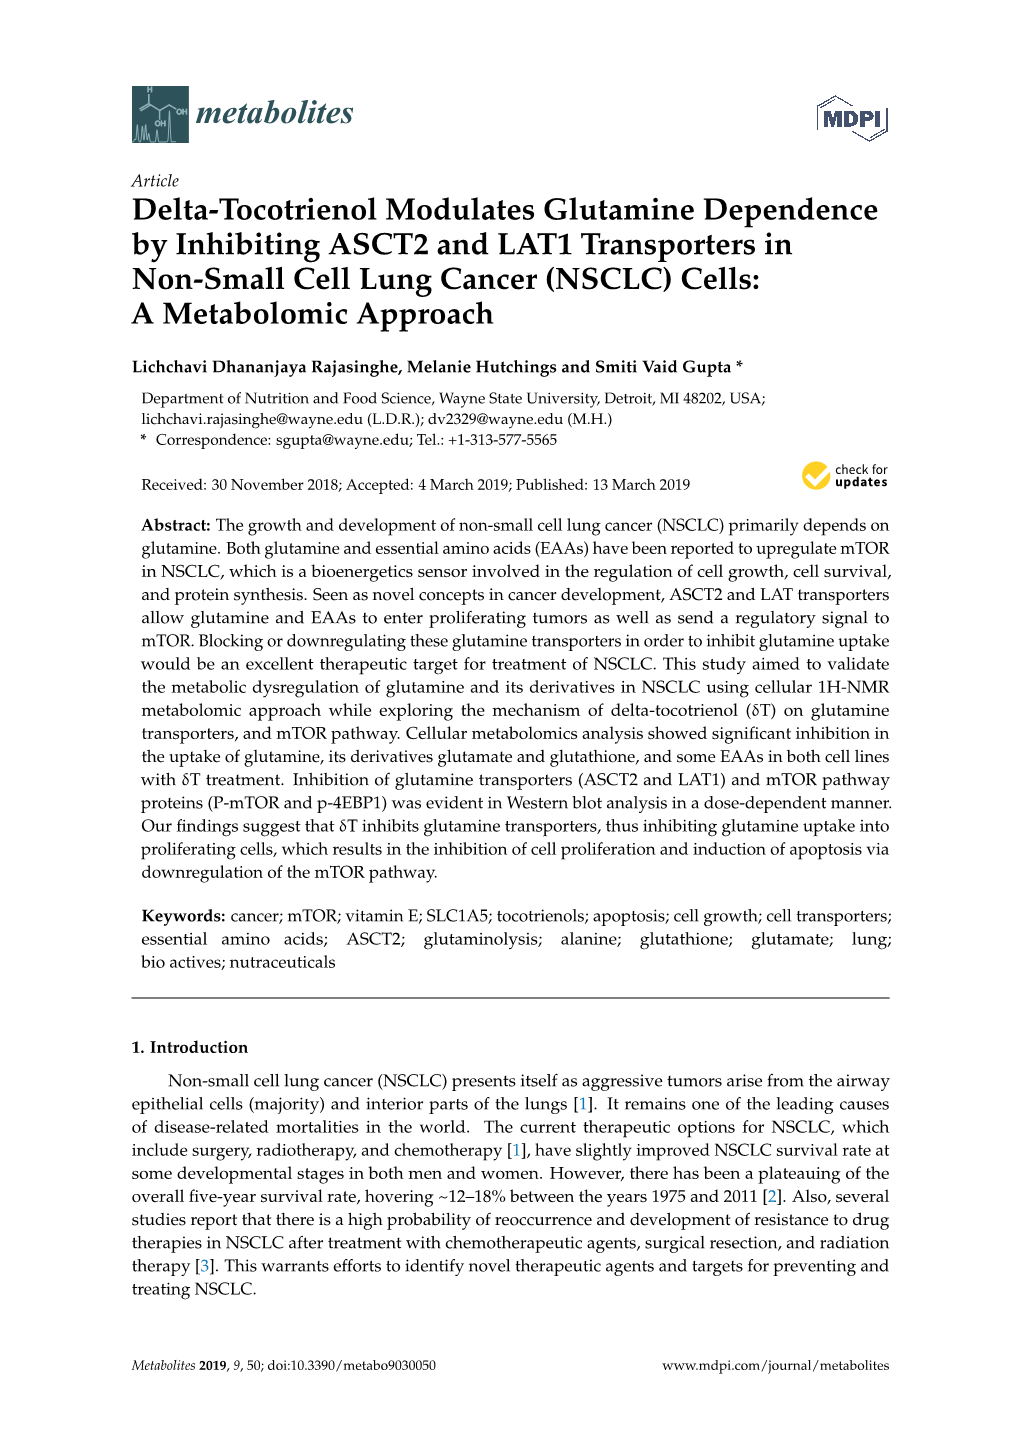 Delta-Tocotrienol Modulates Glutamine Dependence by Inhibiting ASCT2 and LAT1 Transporters in Non-Small Cell Lung Cancer (NSCLC) Cells: a Metabolomic Approach